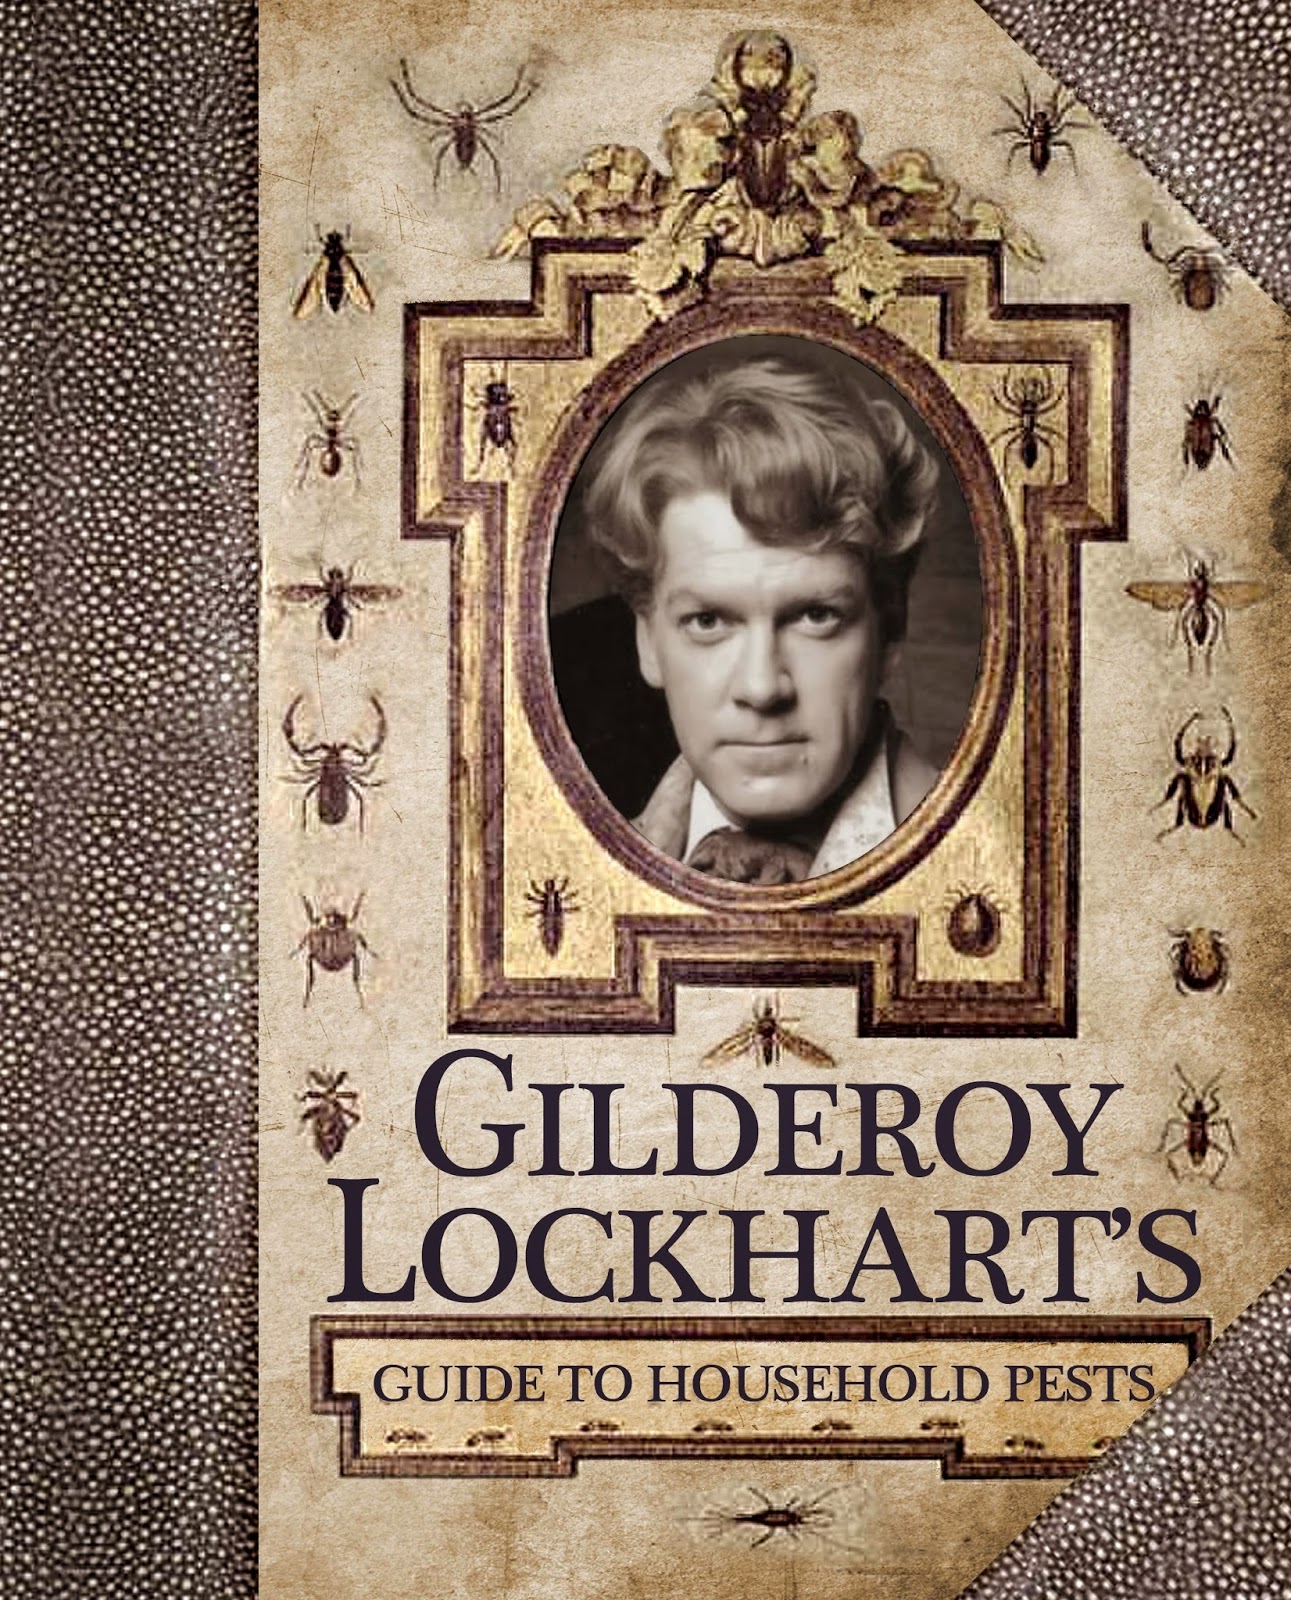 A Crafty Chick: Diagon Alley - Flourish & Blotts and 